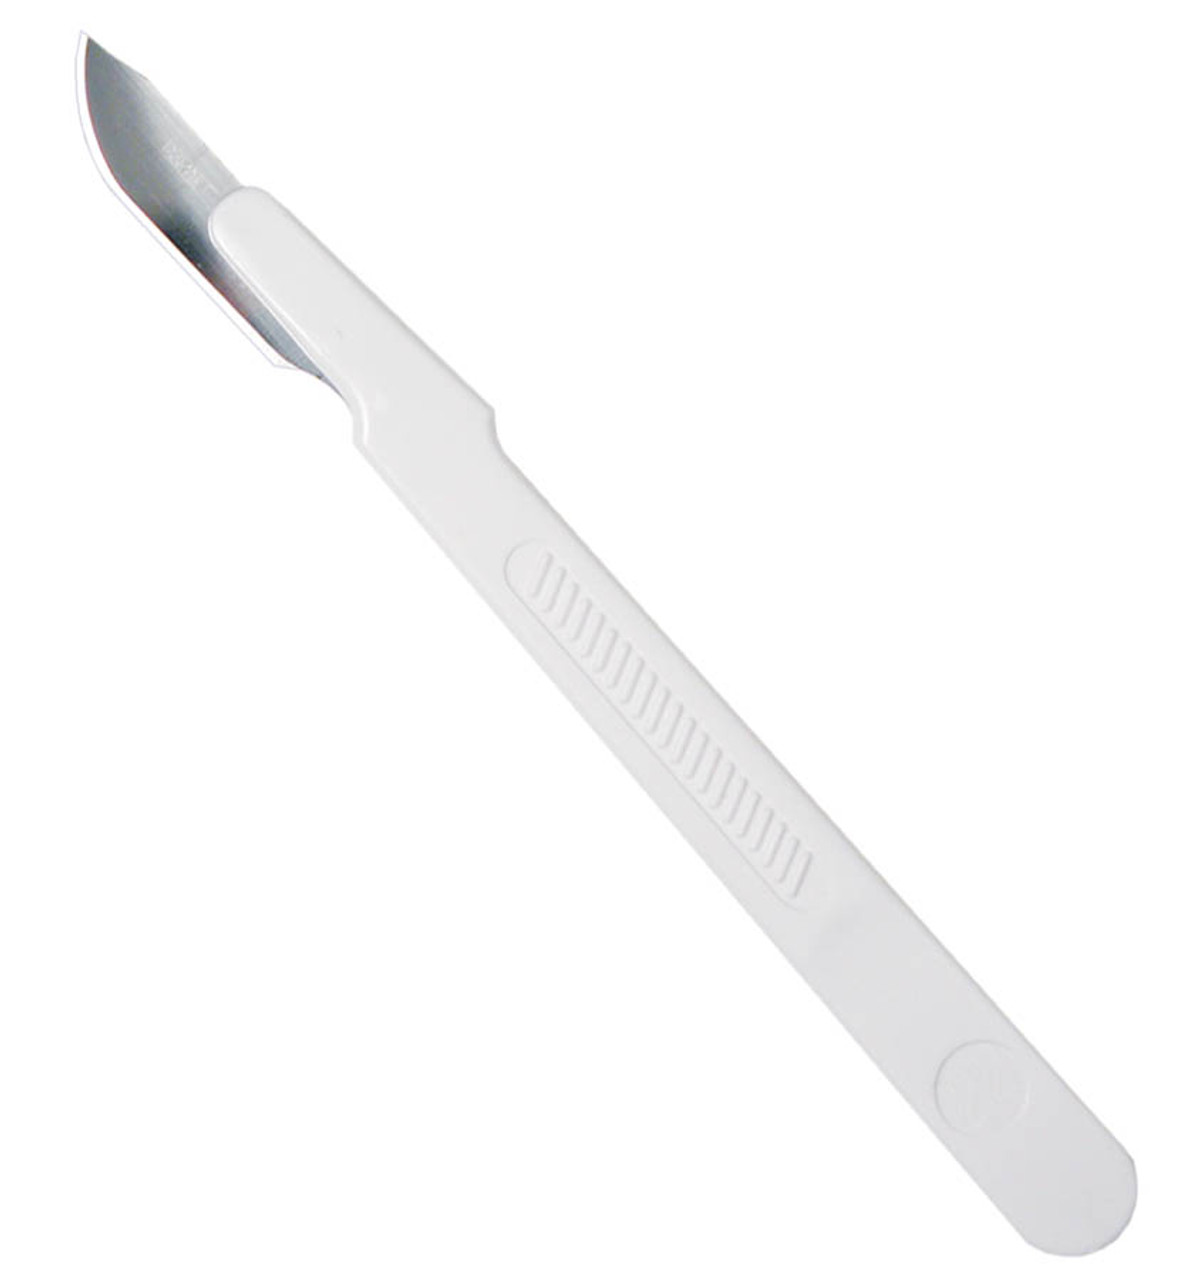 10 sharp carbon steel scalpel blades for biology dissection.